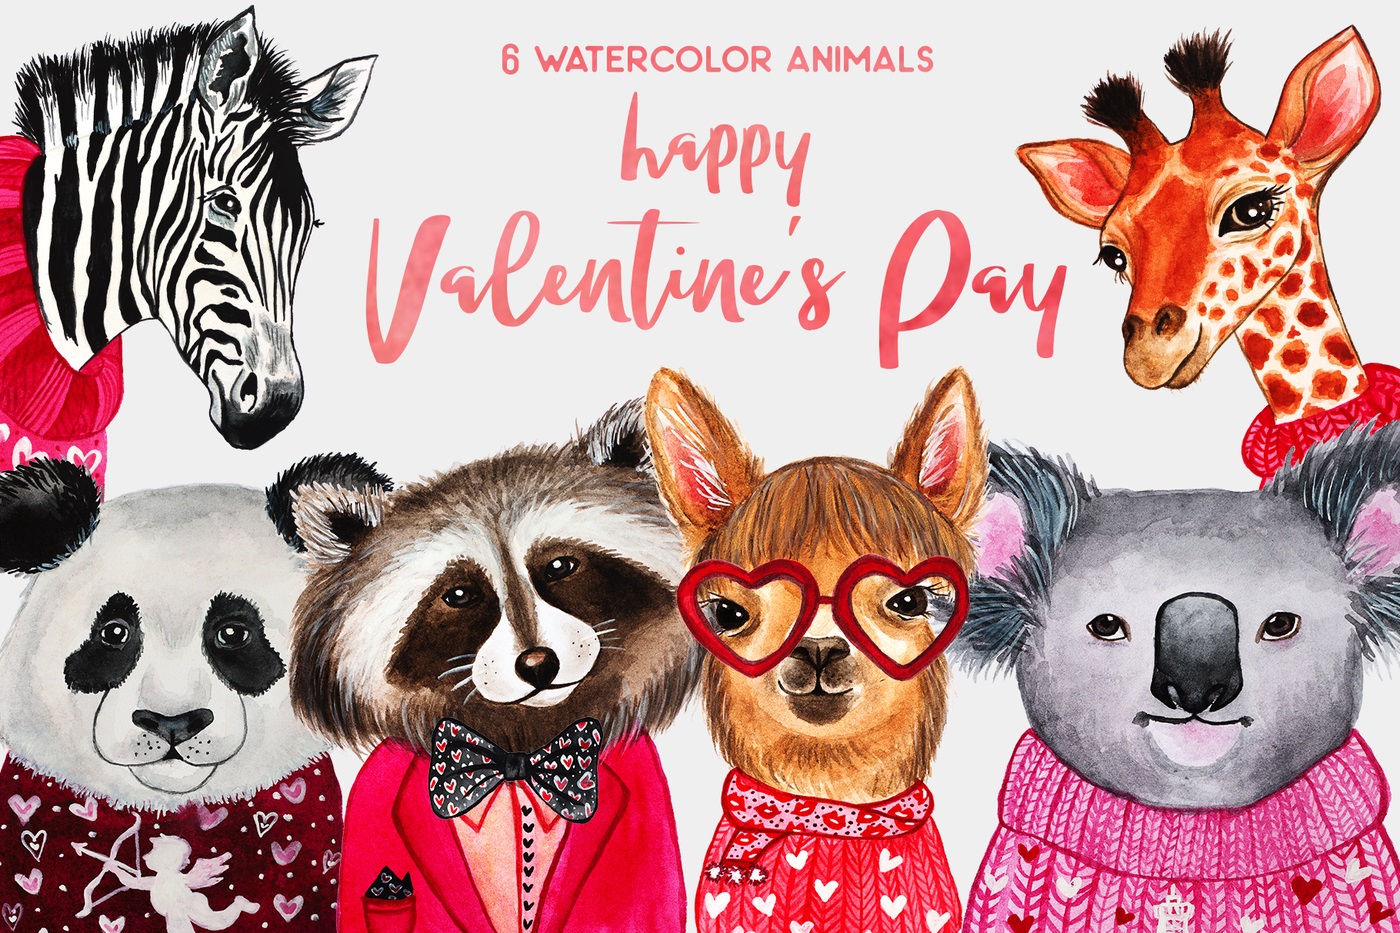 Valentine's Day Watercolor Animals - The Spring Romance Bundle 